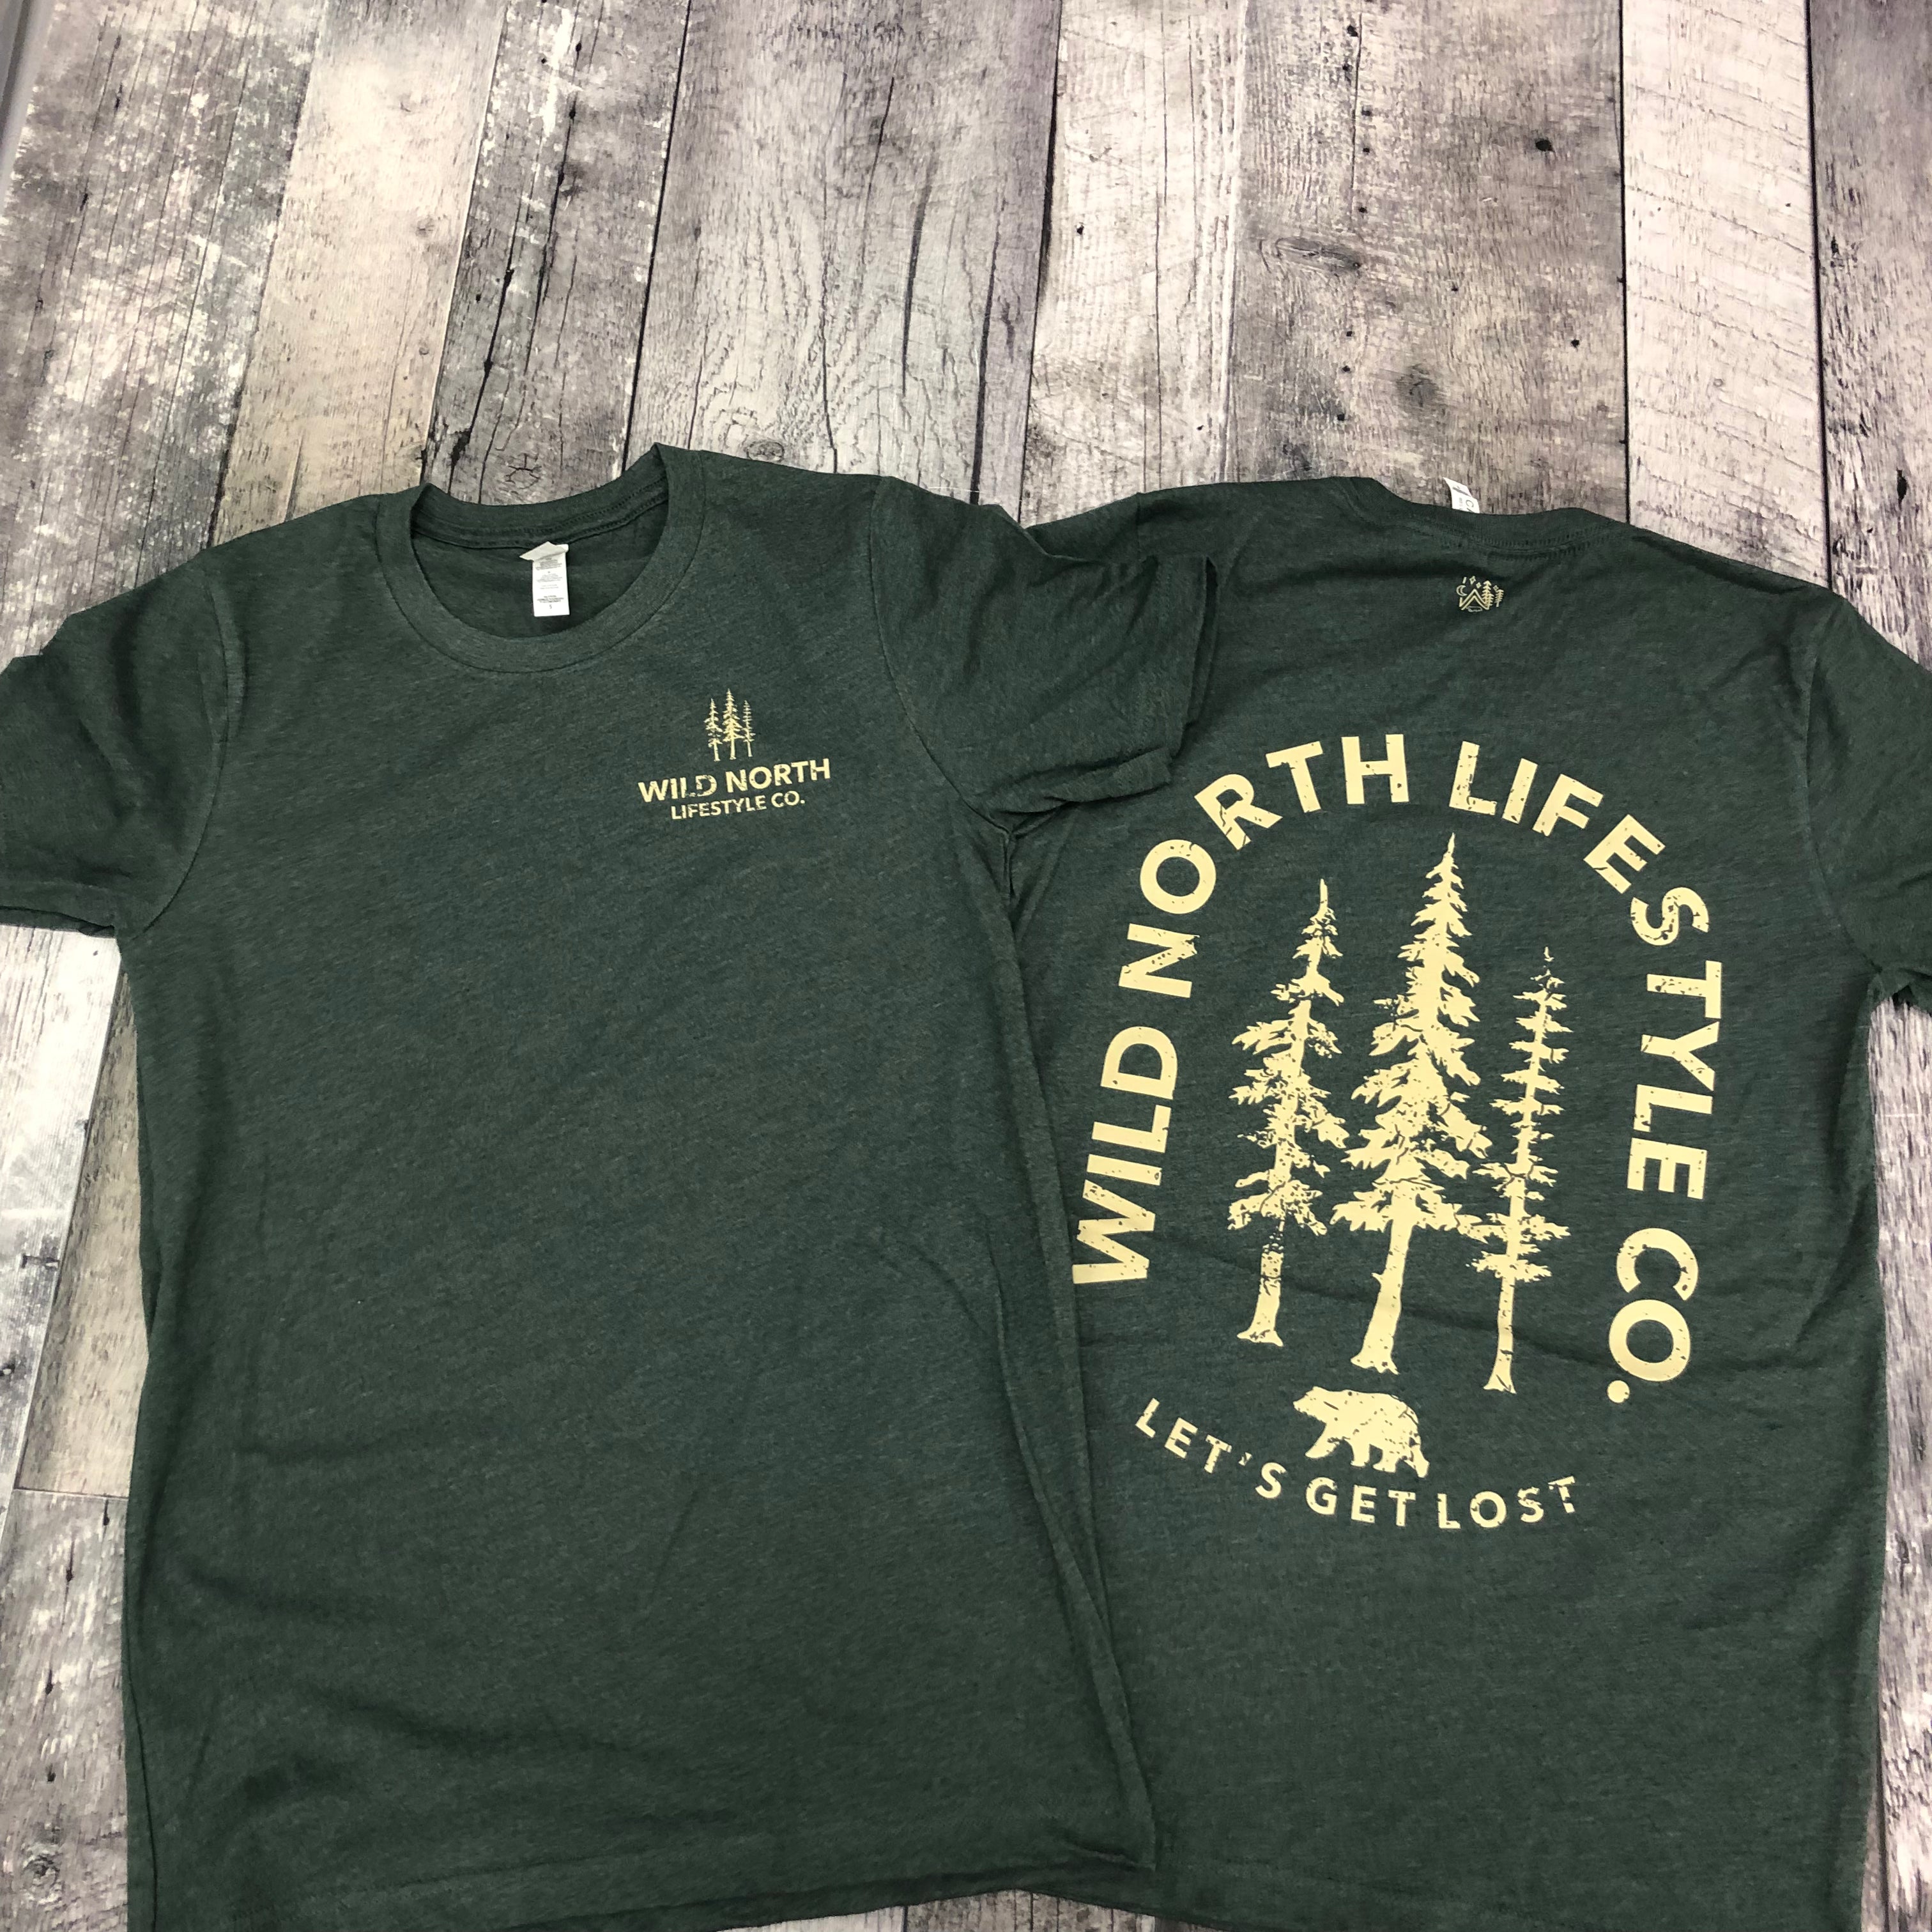 Let's Get Lost Tshirt Unisex - Forest